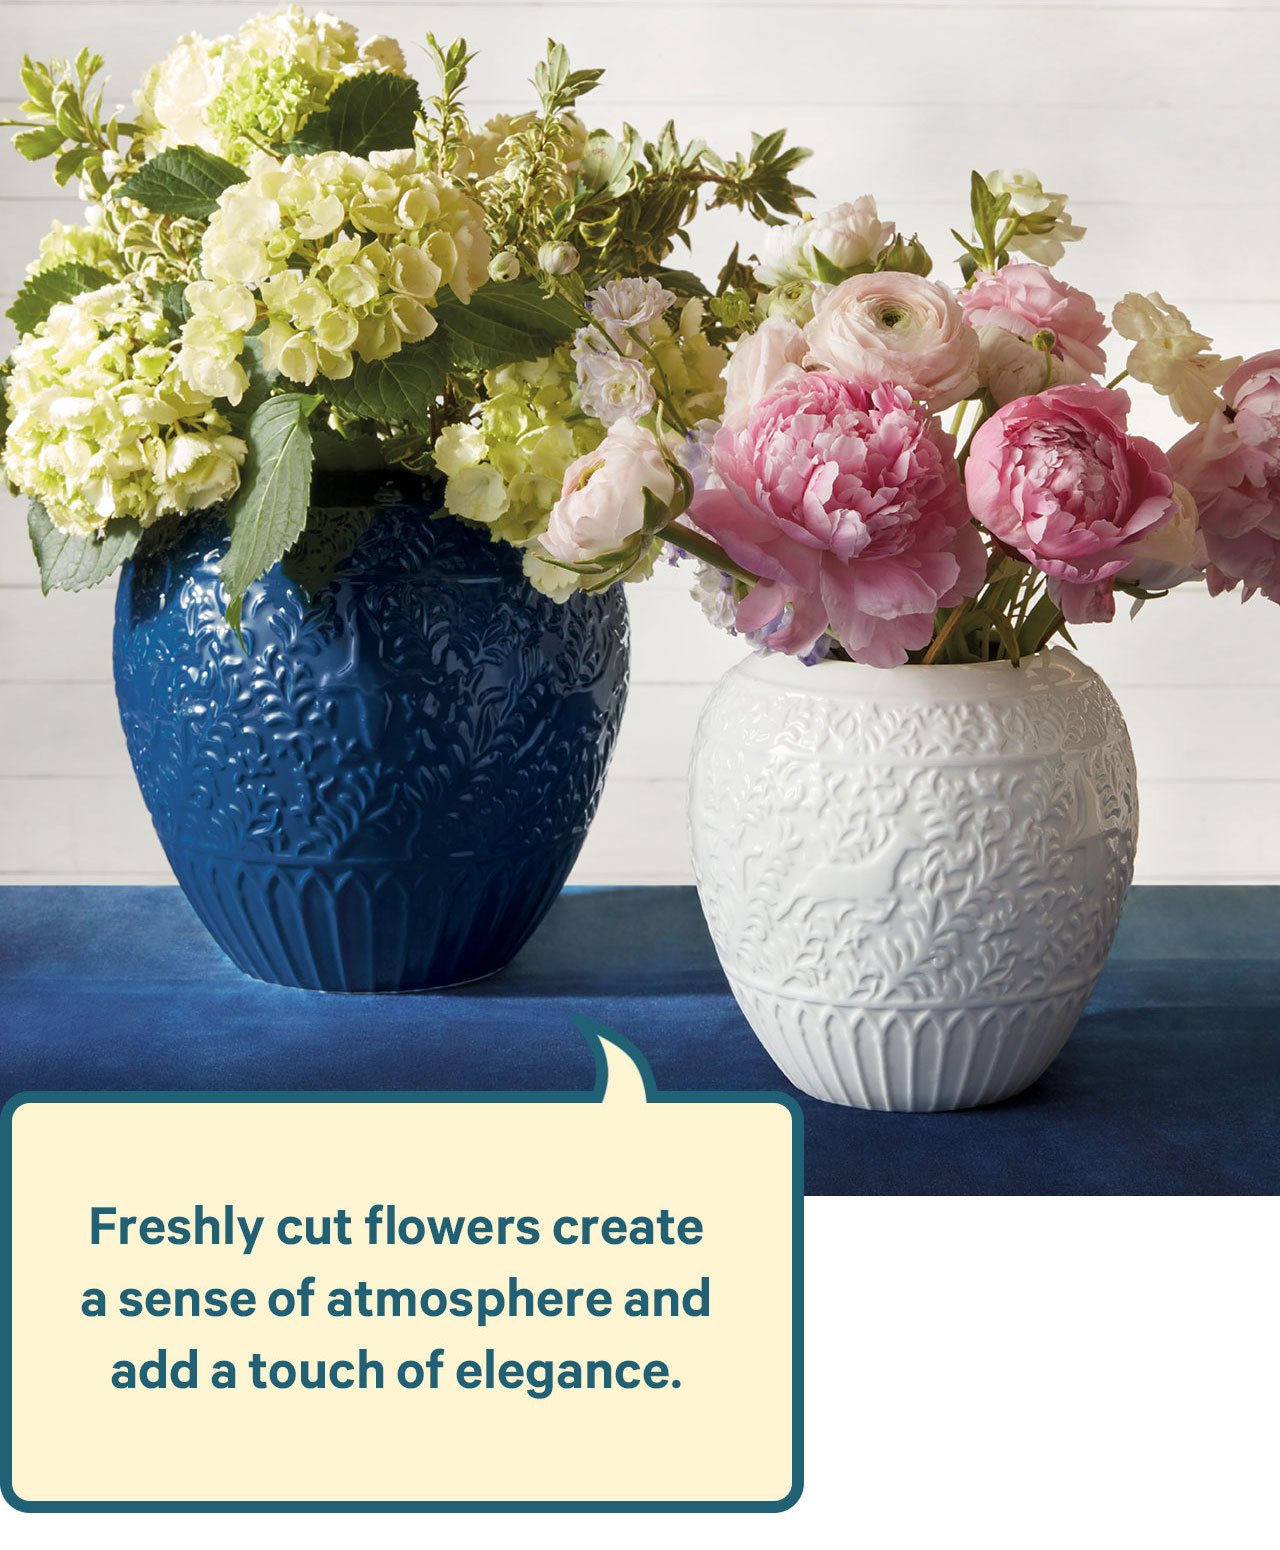 Freshly cut flowers create a sense of atmosphere and add a touch of elegance.